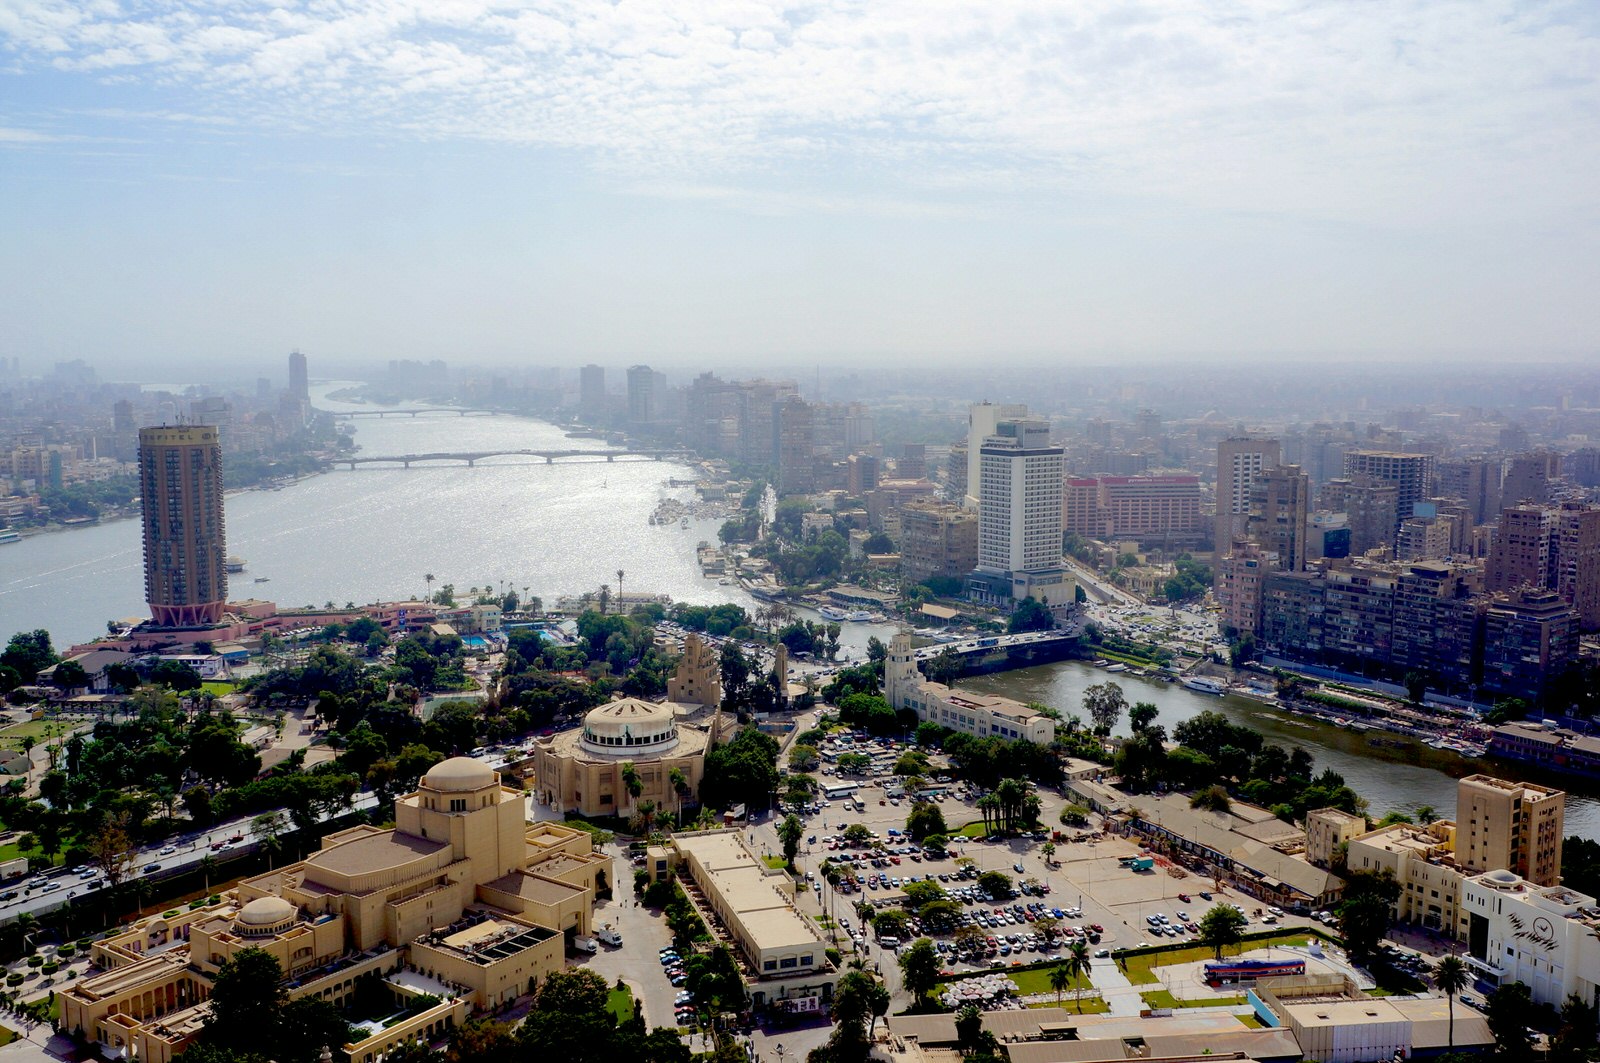 View from Cairo Tower. Image by Karima Hassan Ragab / Lonely Planet